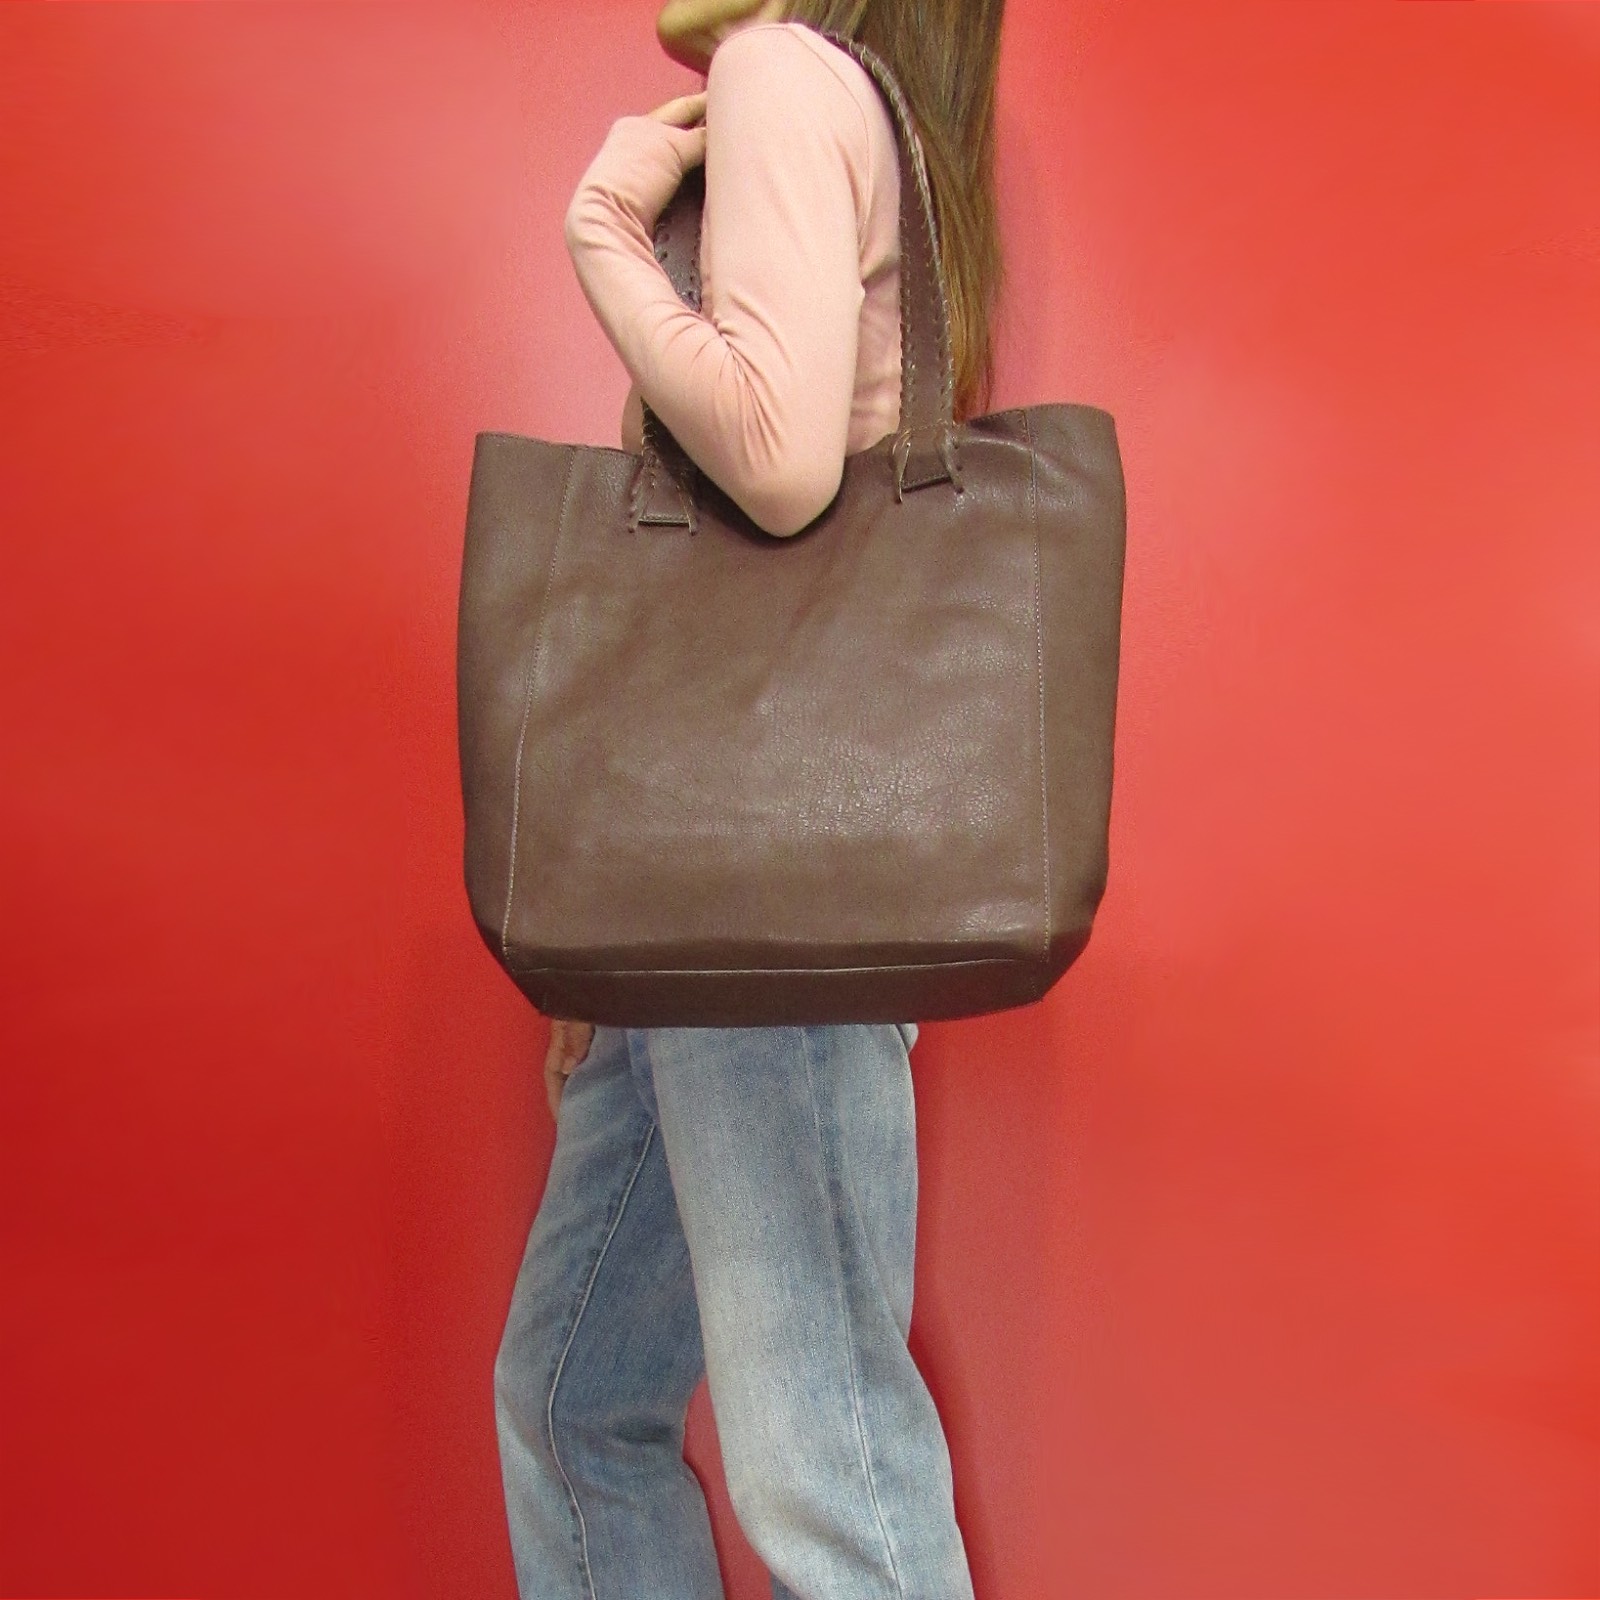 Bag151 Faux Leather Tote Bag with Pouch/Brown